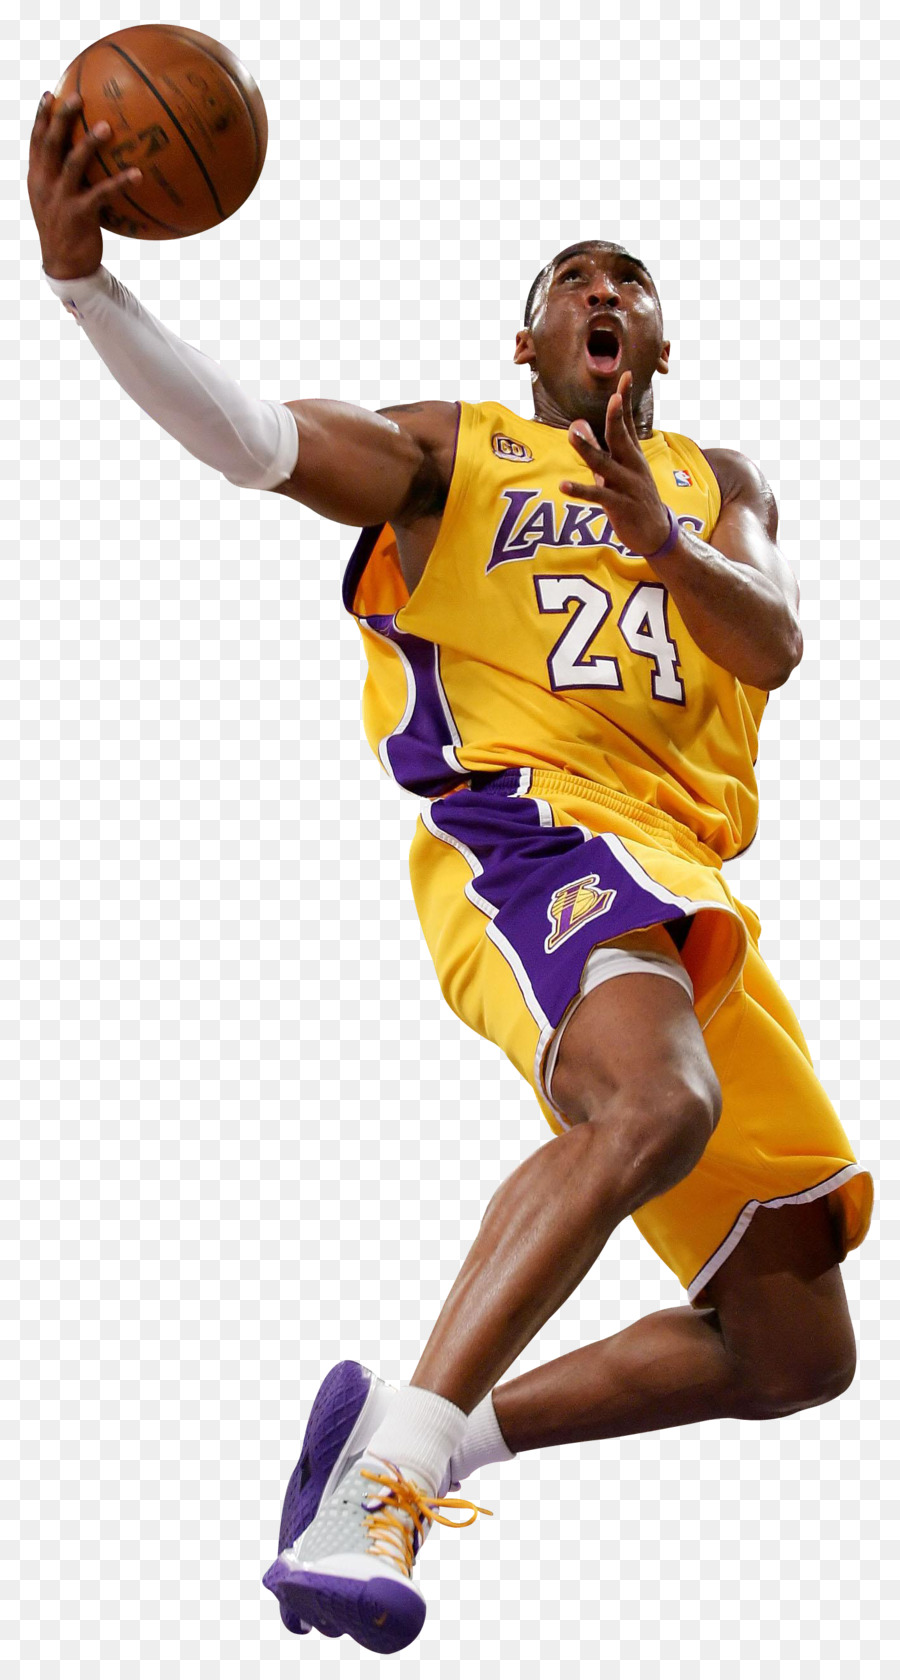 NBA Los Angeles Lakers Golden State Warriors - Kobe Bryant PNG HD png download - 1408*2628 - Free Transparent Nba png Download.